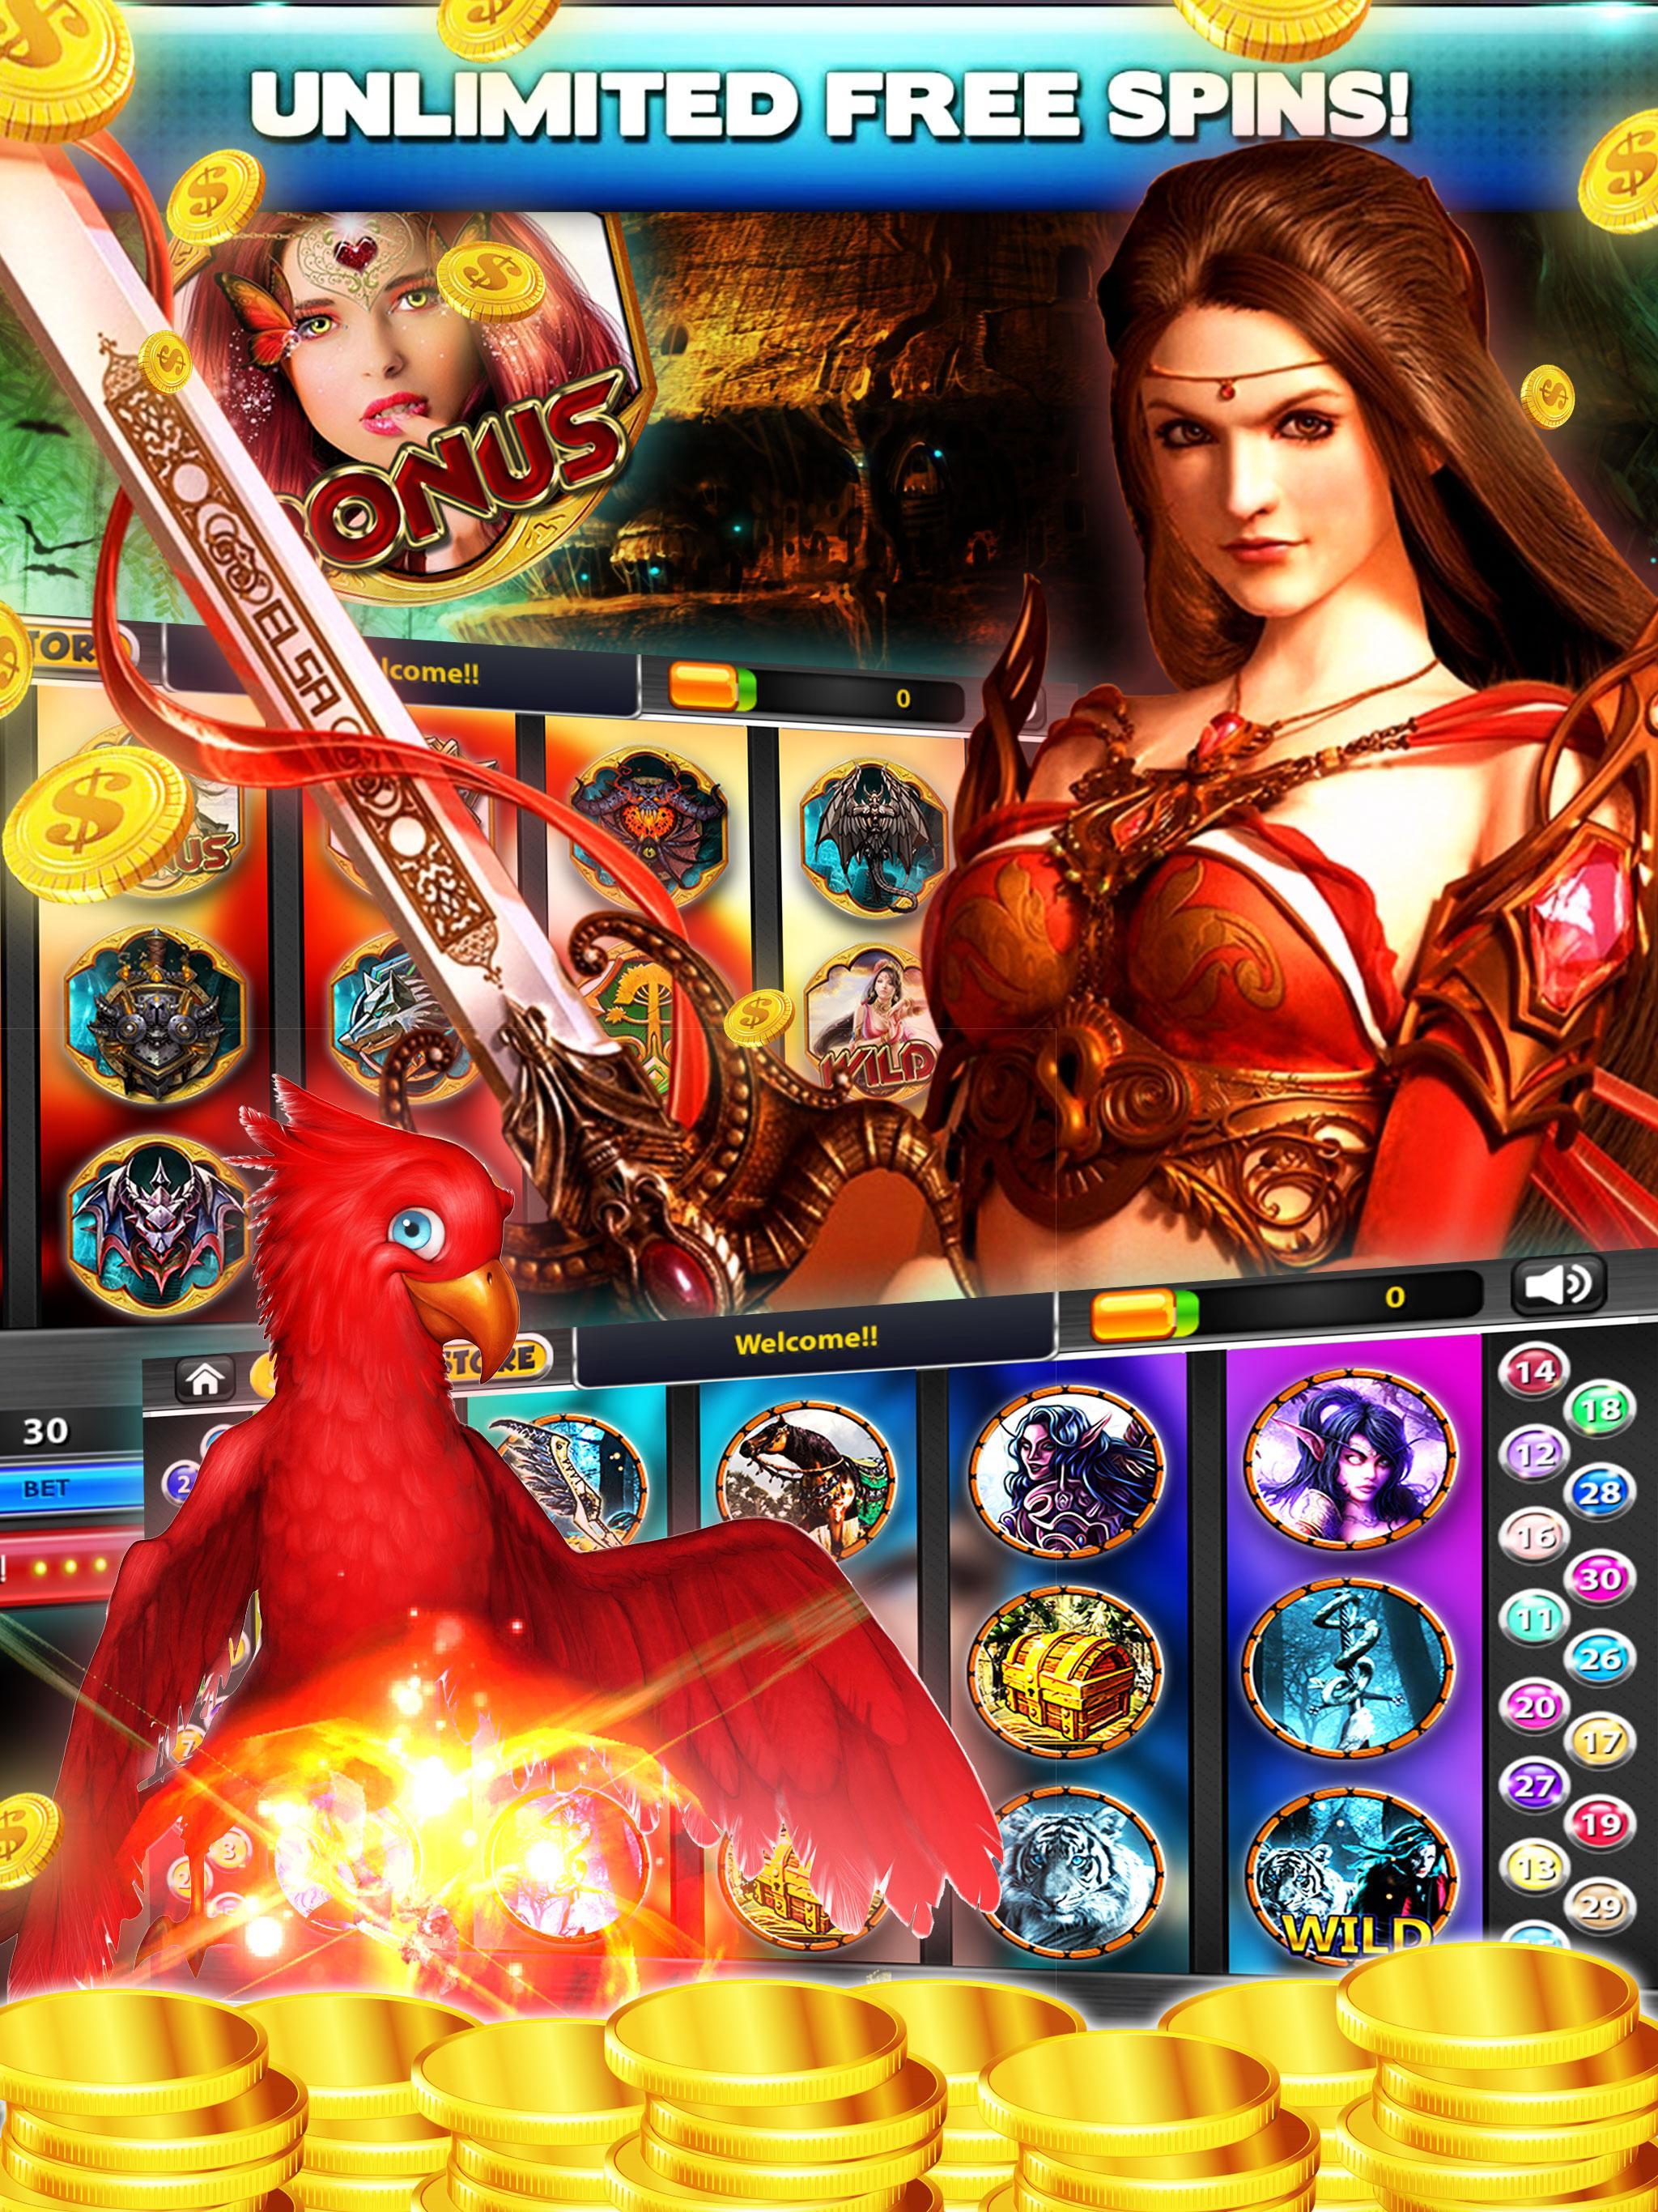 Scatter spin slots for Android - APK Download